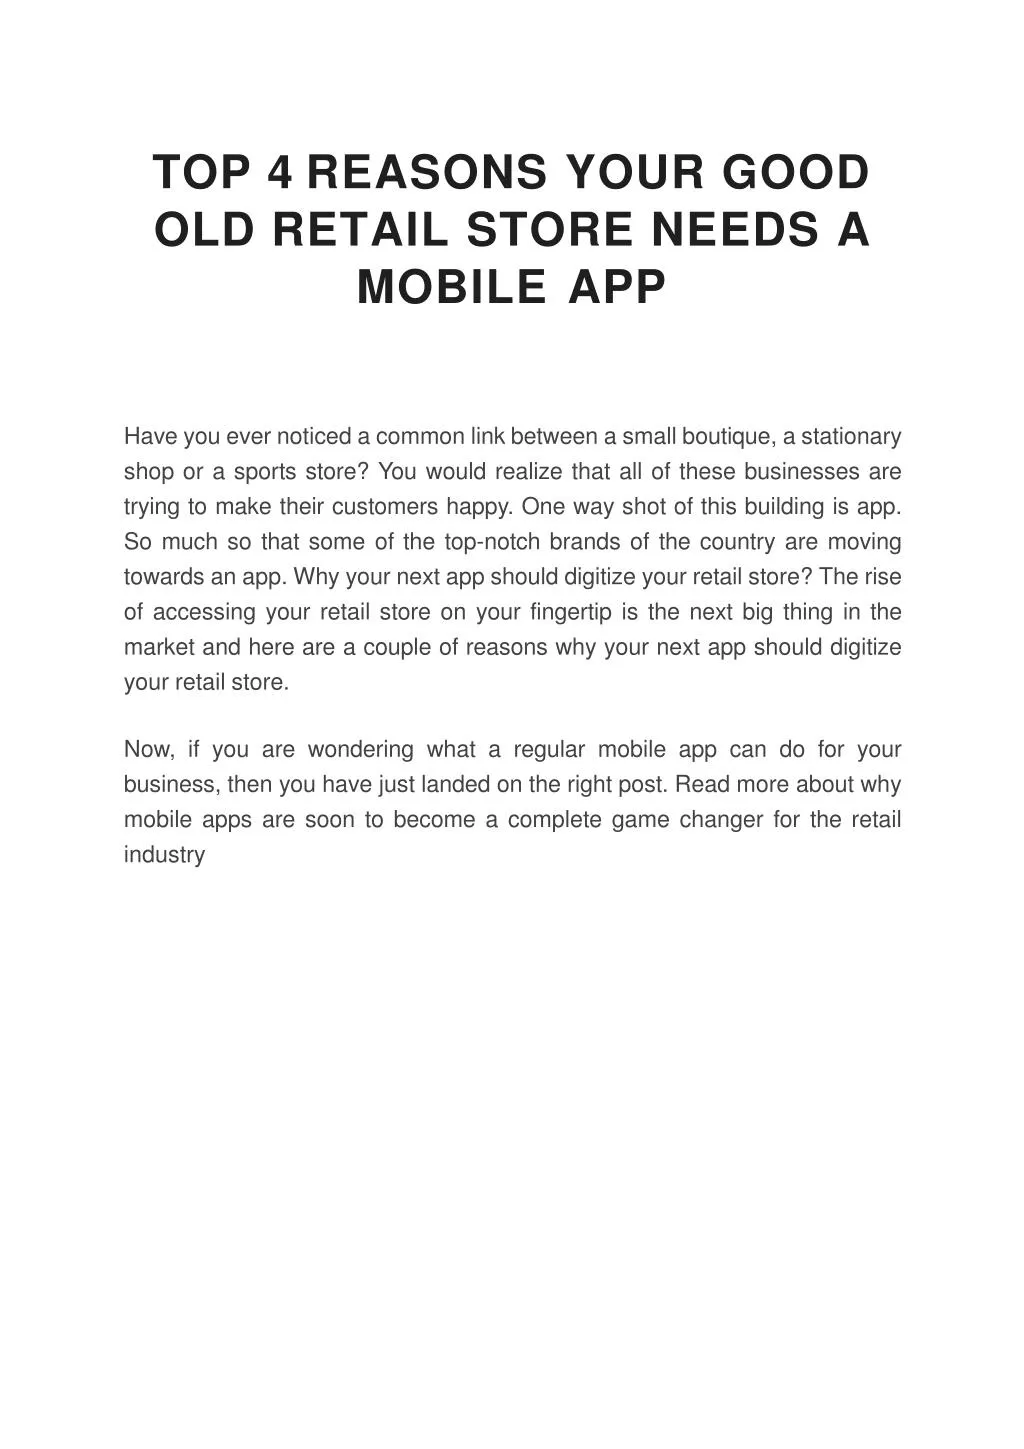 top 4 reasons your good old retail store needs a mobile app